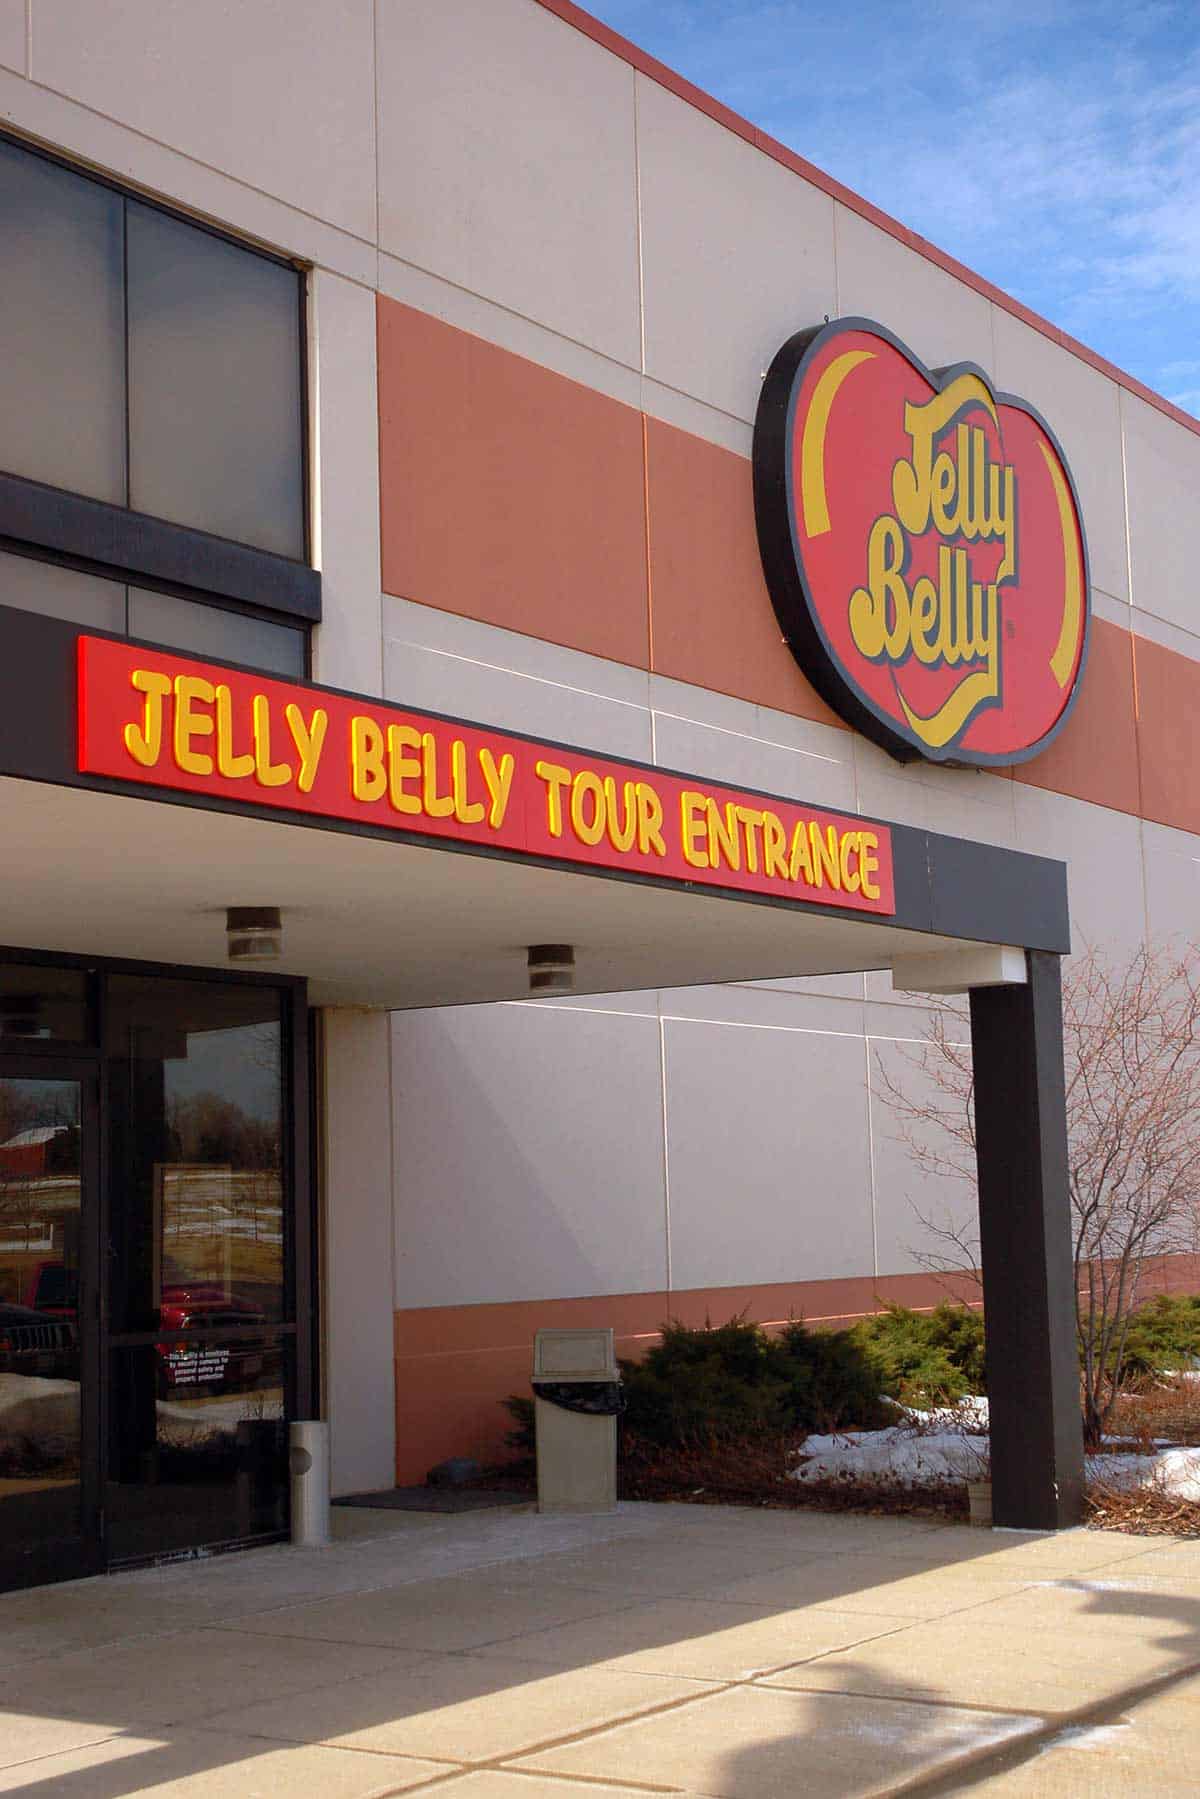 The outside entrance to the Jelly Belly factory and tour entrance.